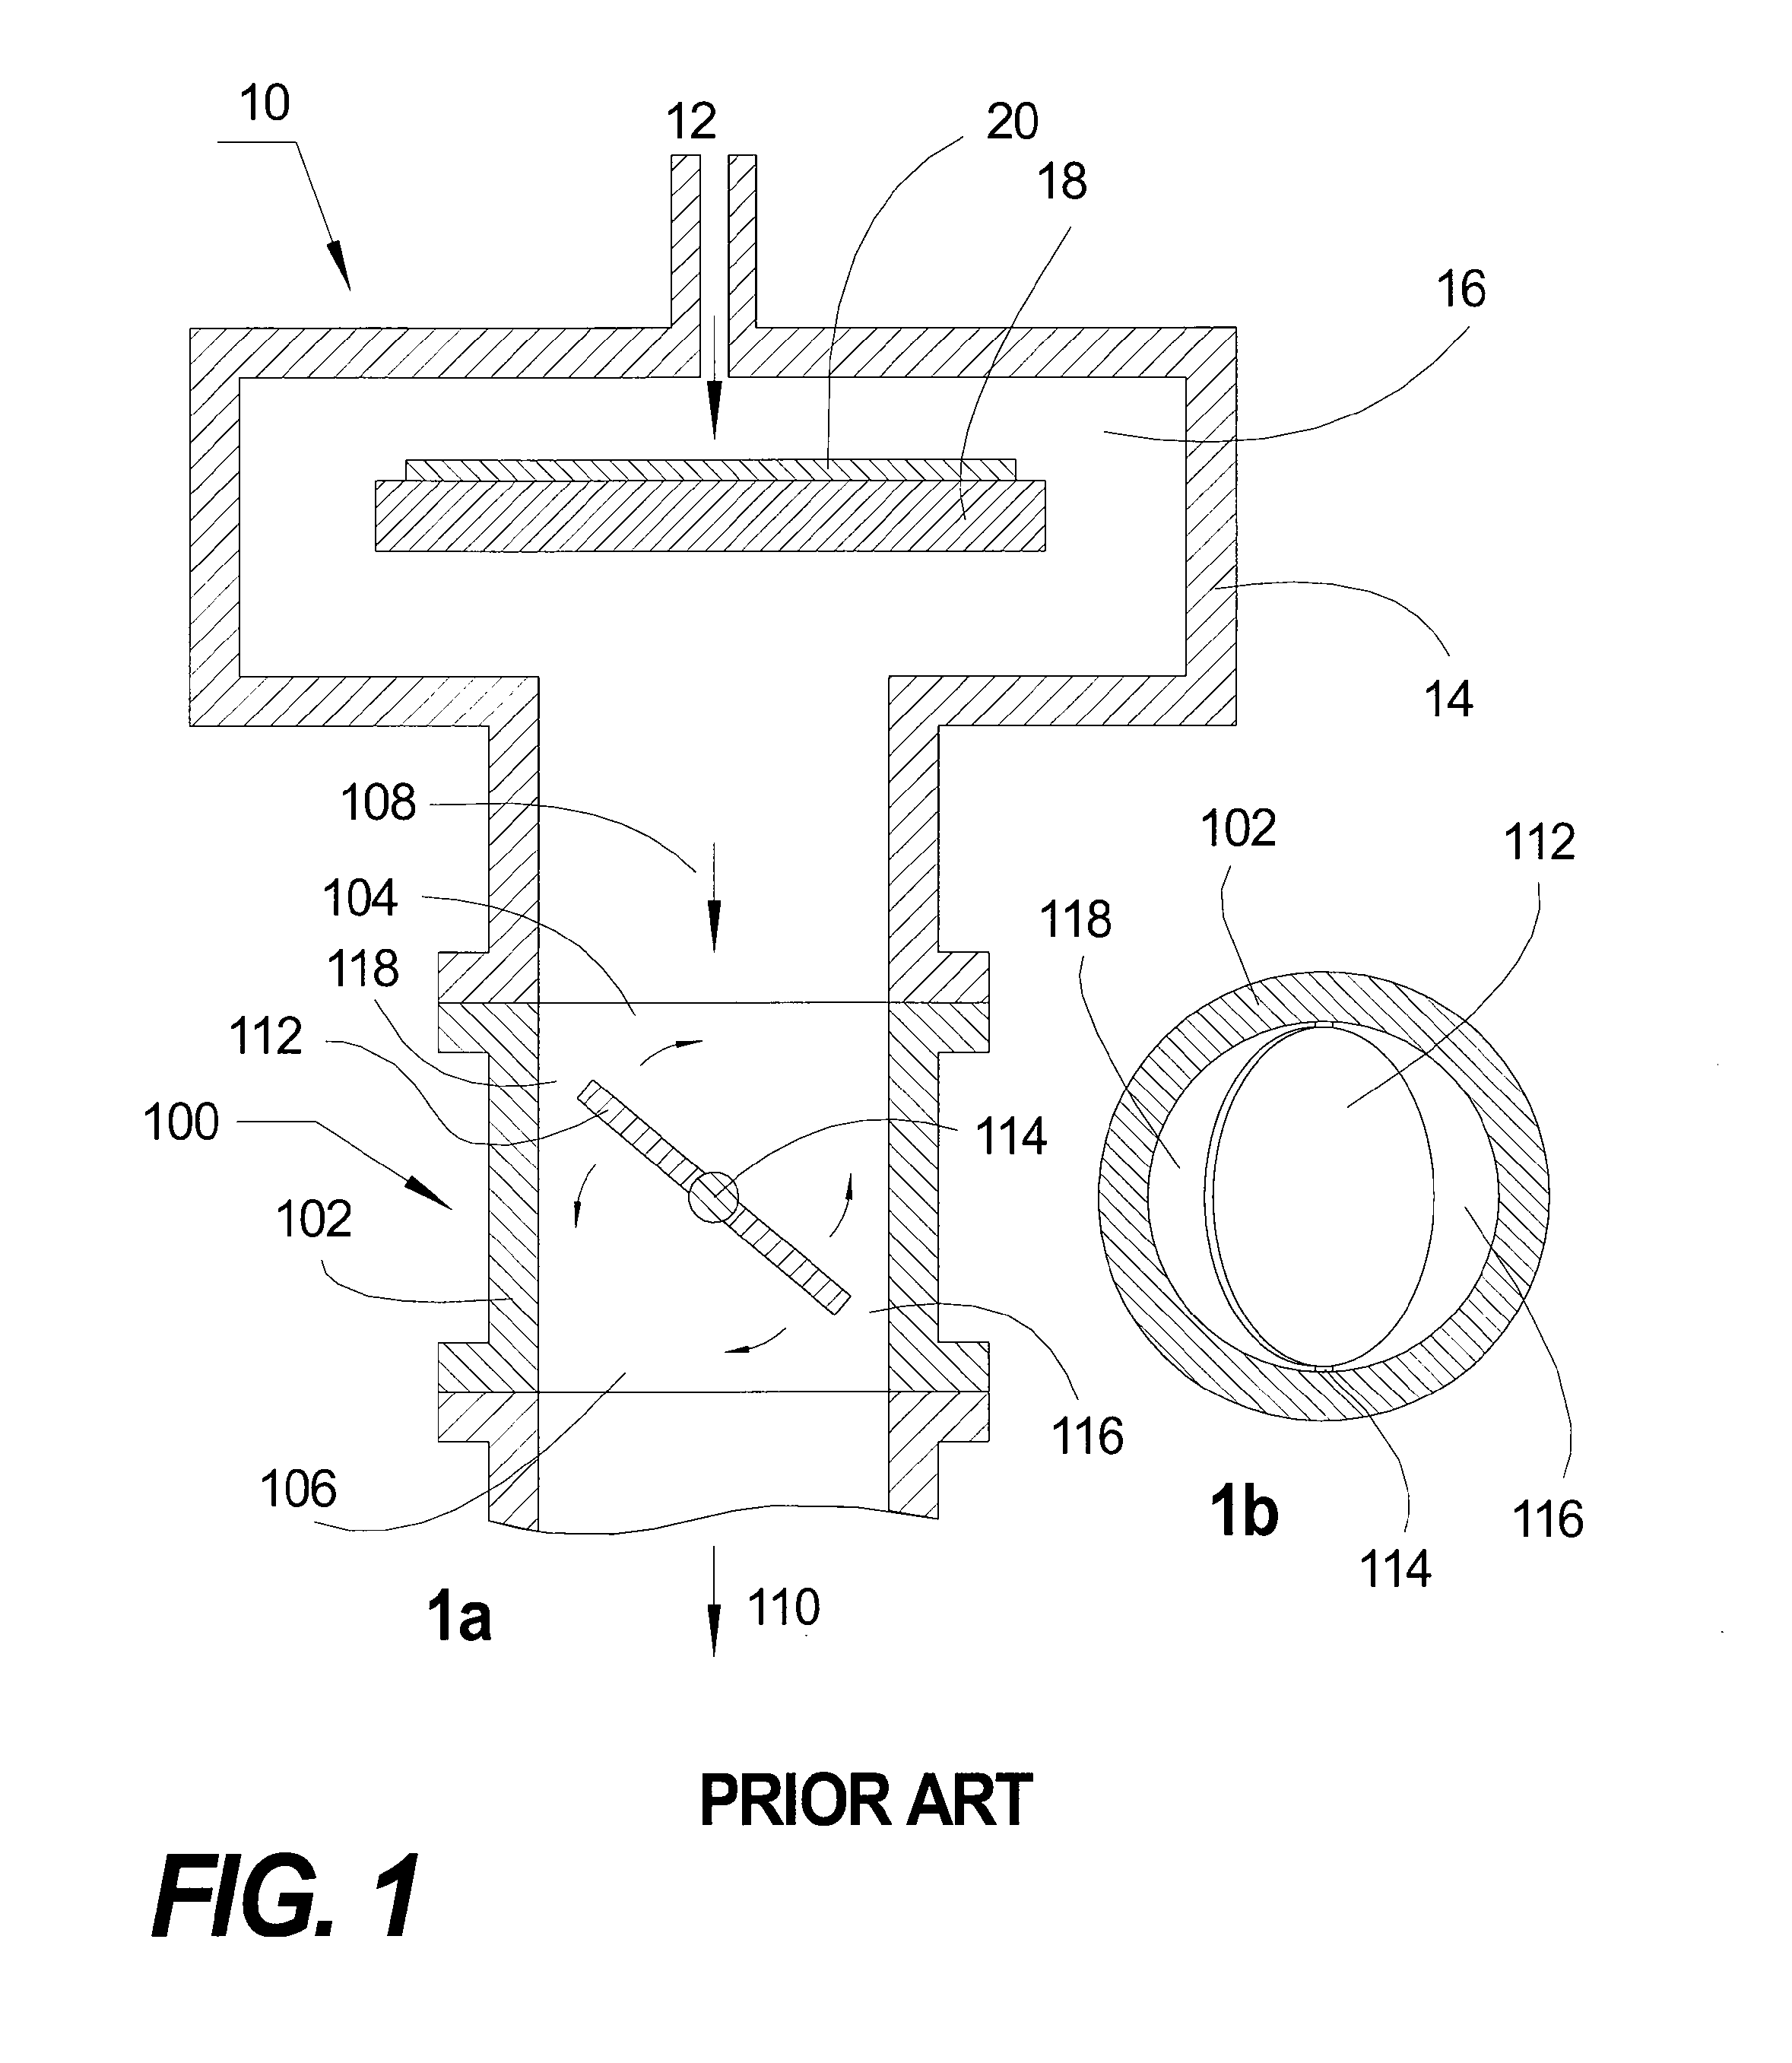 Apparatus and method for downstream pressure control and sub-atmospheric reactive gas abatement